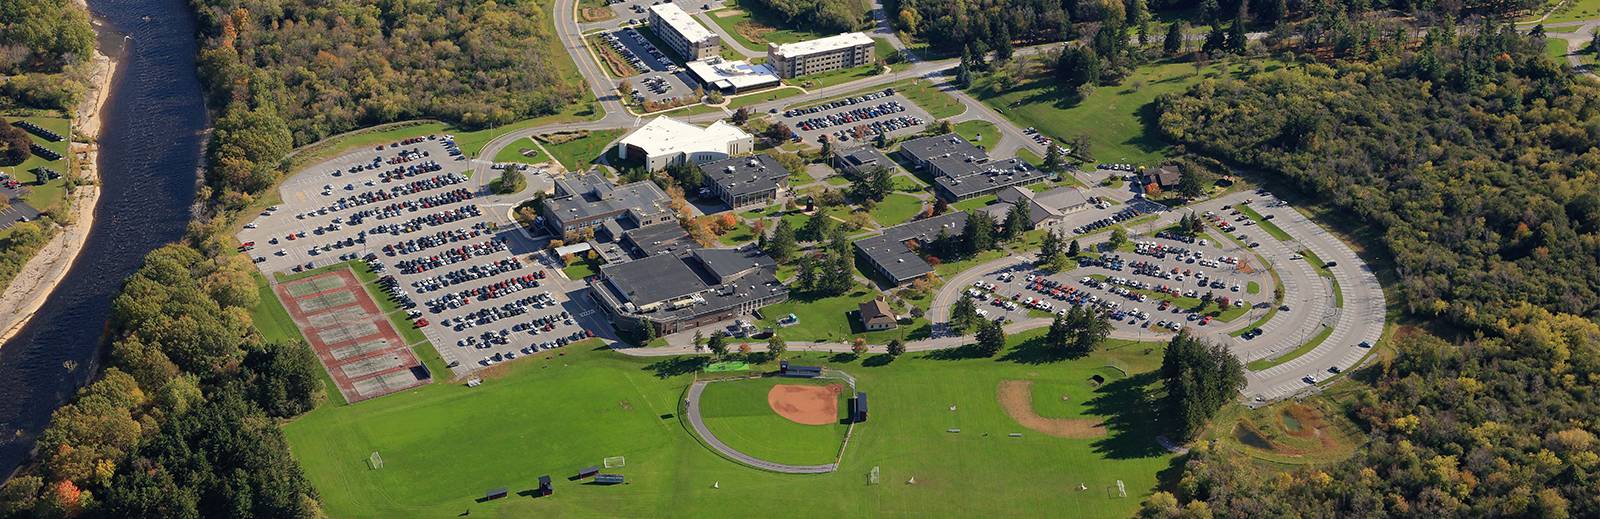 Aerial view of Jefferson Community College campus